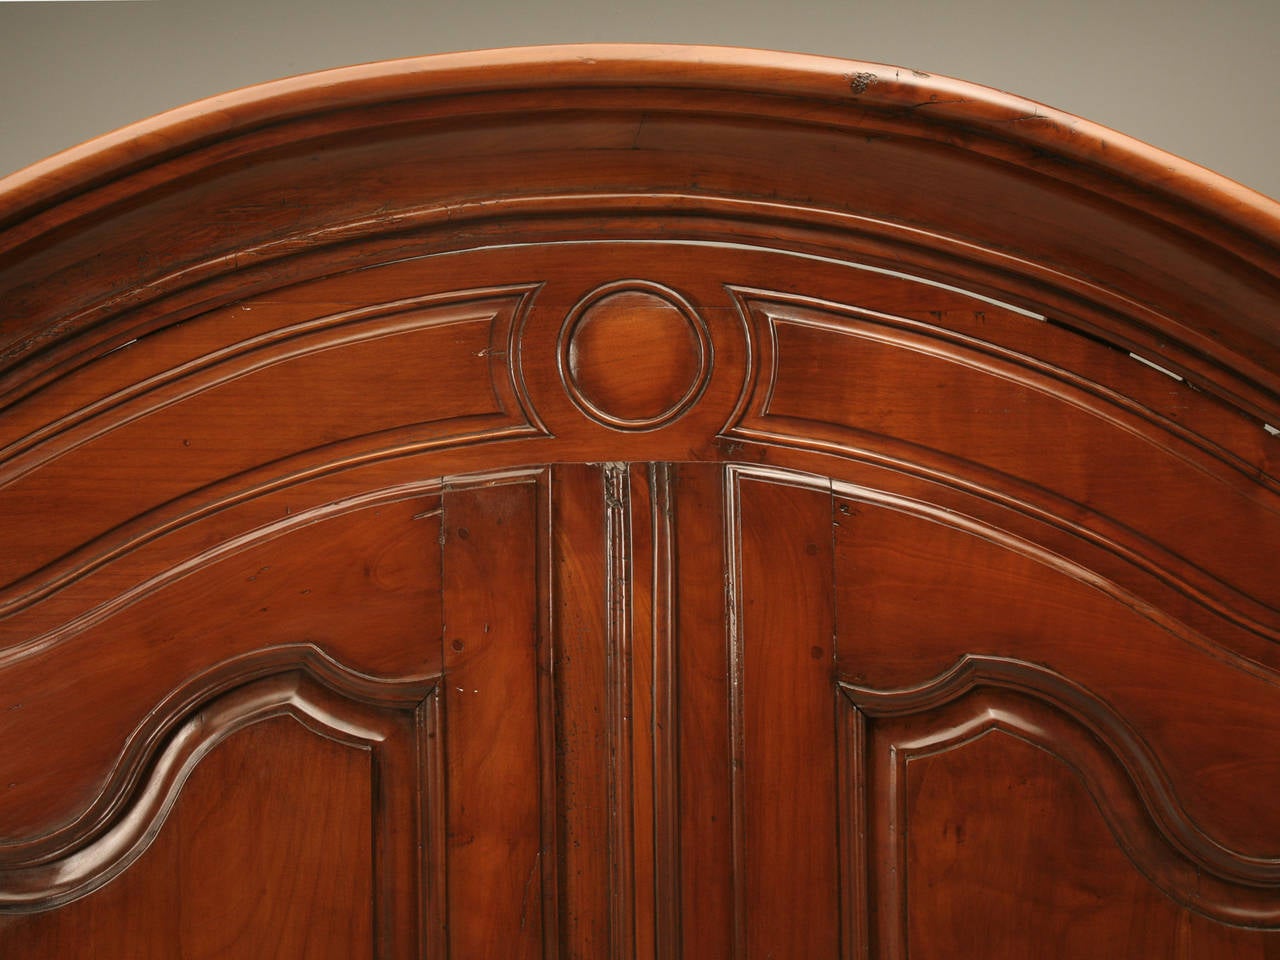 Hand-Crafted French Louis XV Style Armoire in Cherrywood, circa early 1800's Fully Restored